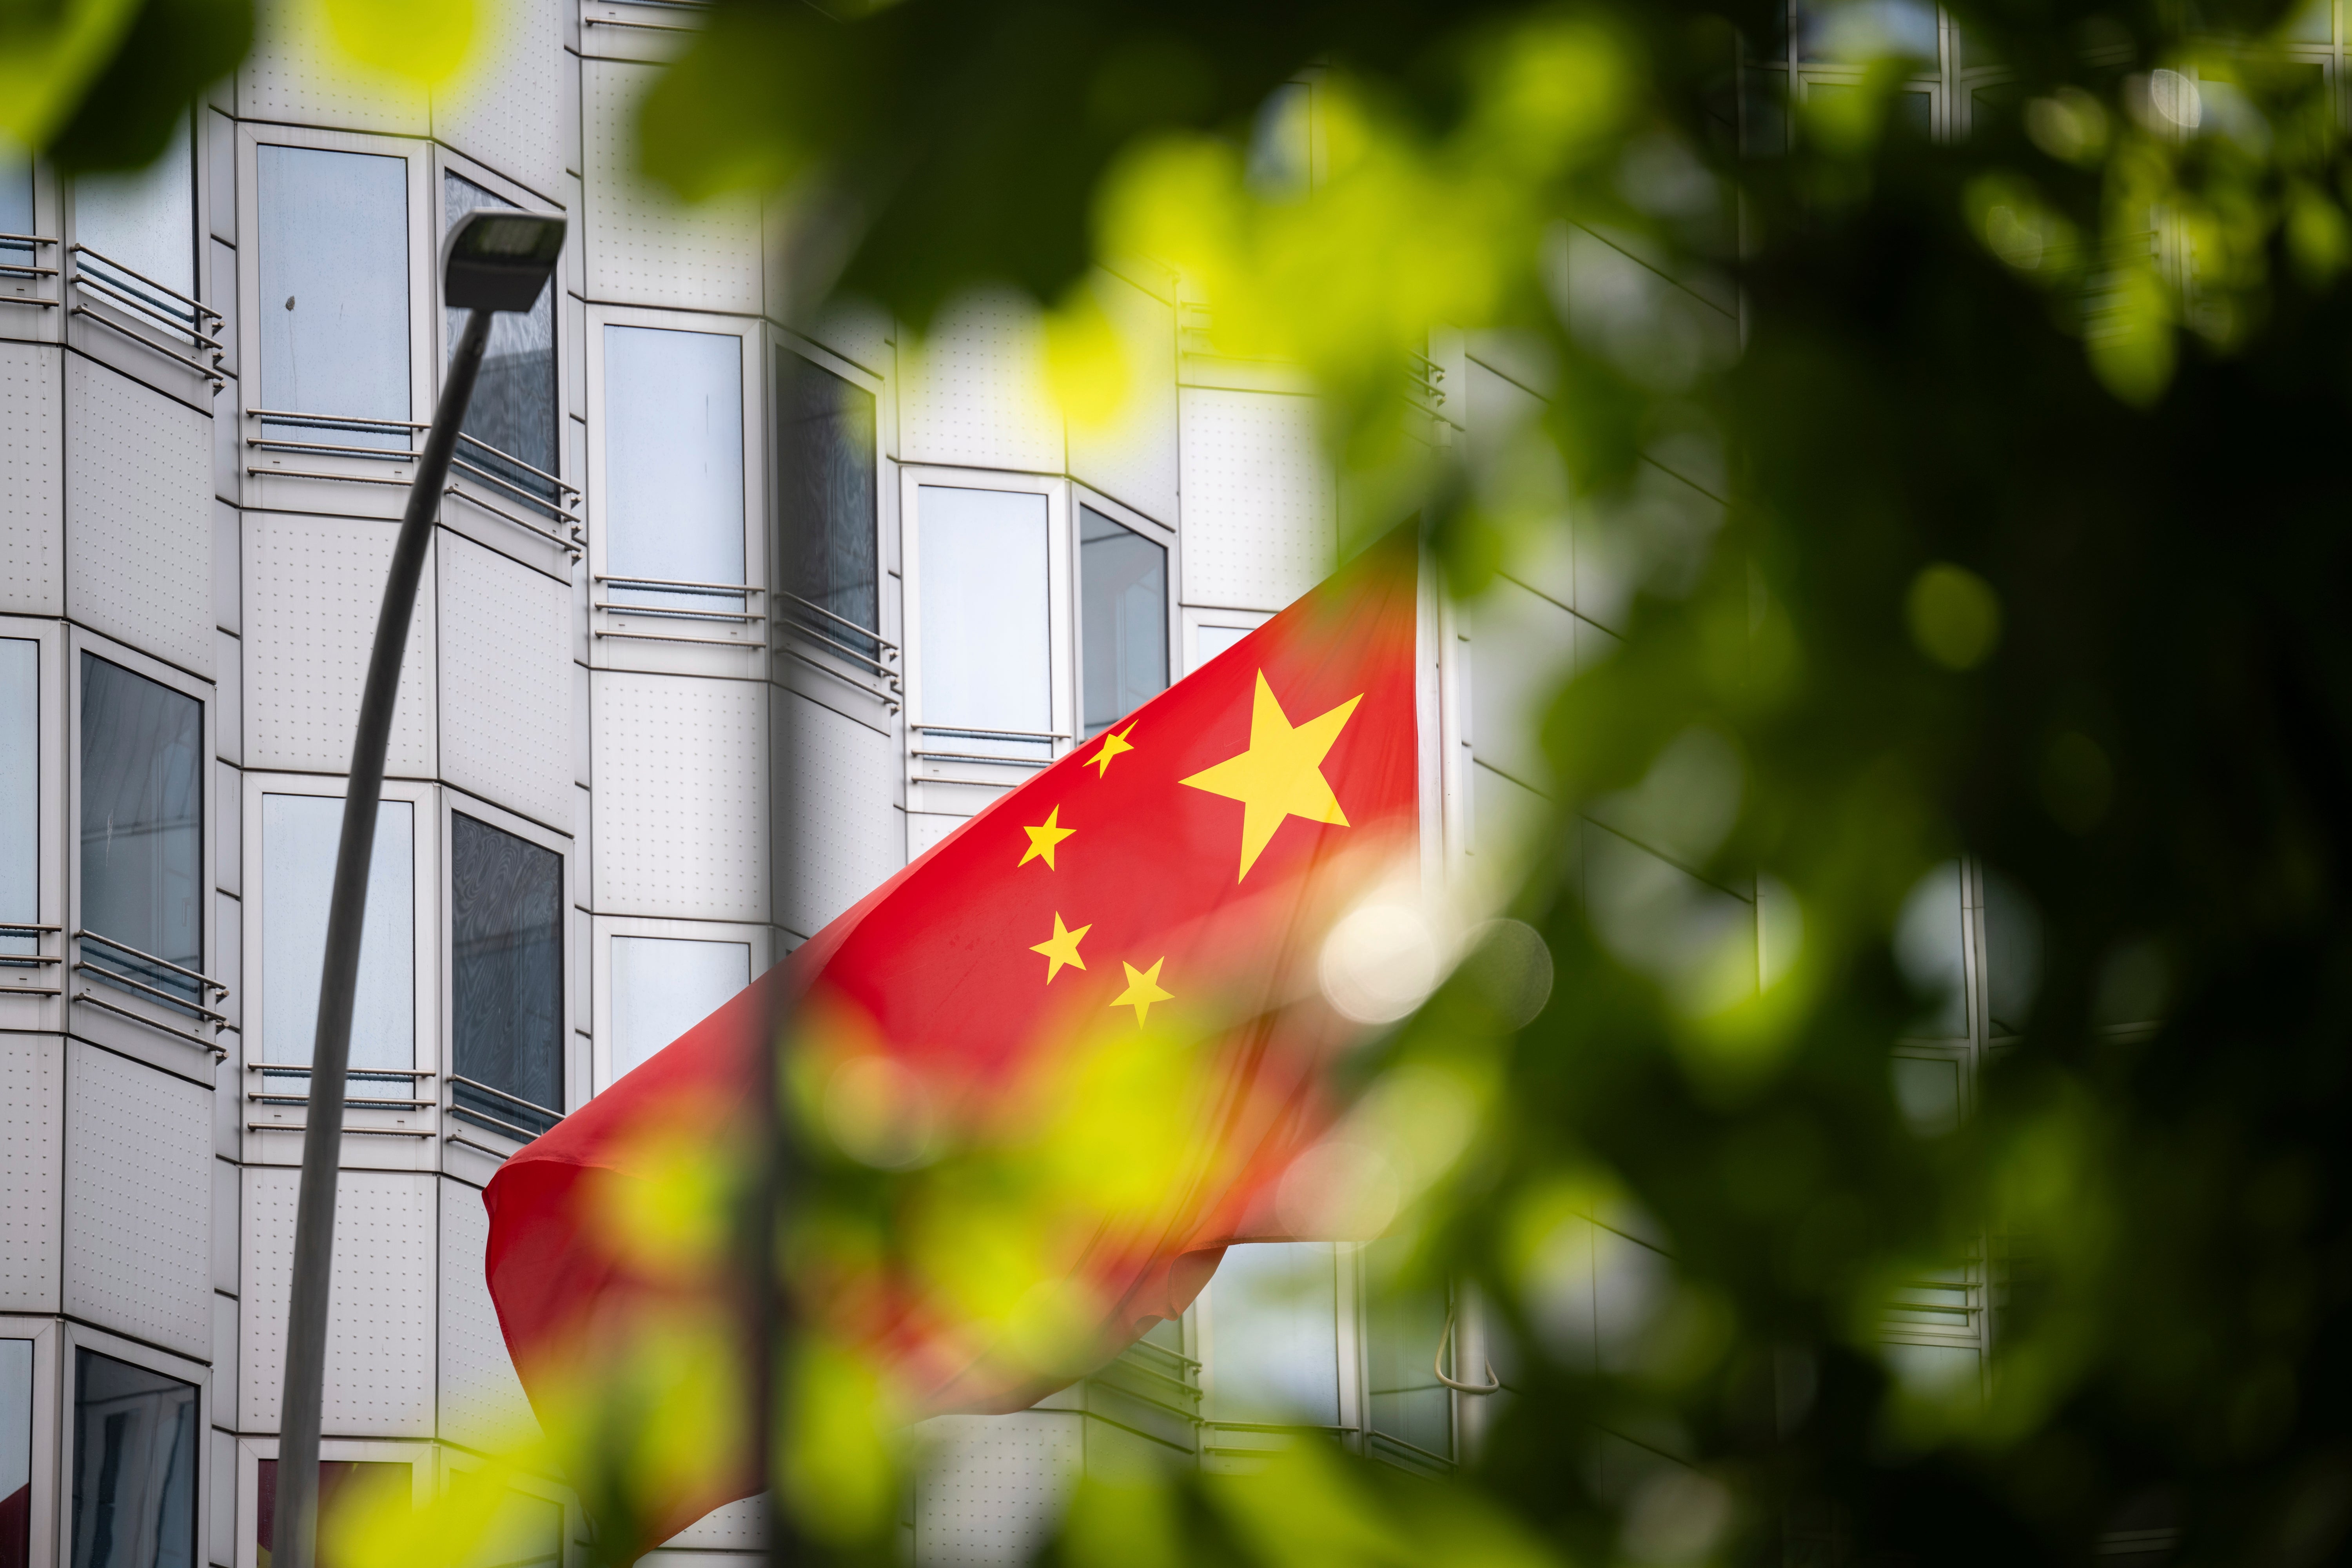 China’s flag flies in front of the embassy of China in Berlin, Germany, Monday, April 22, 202